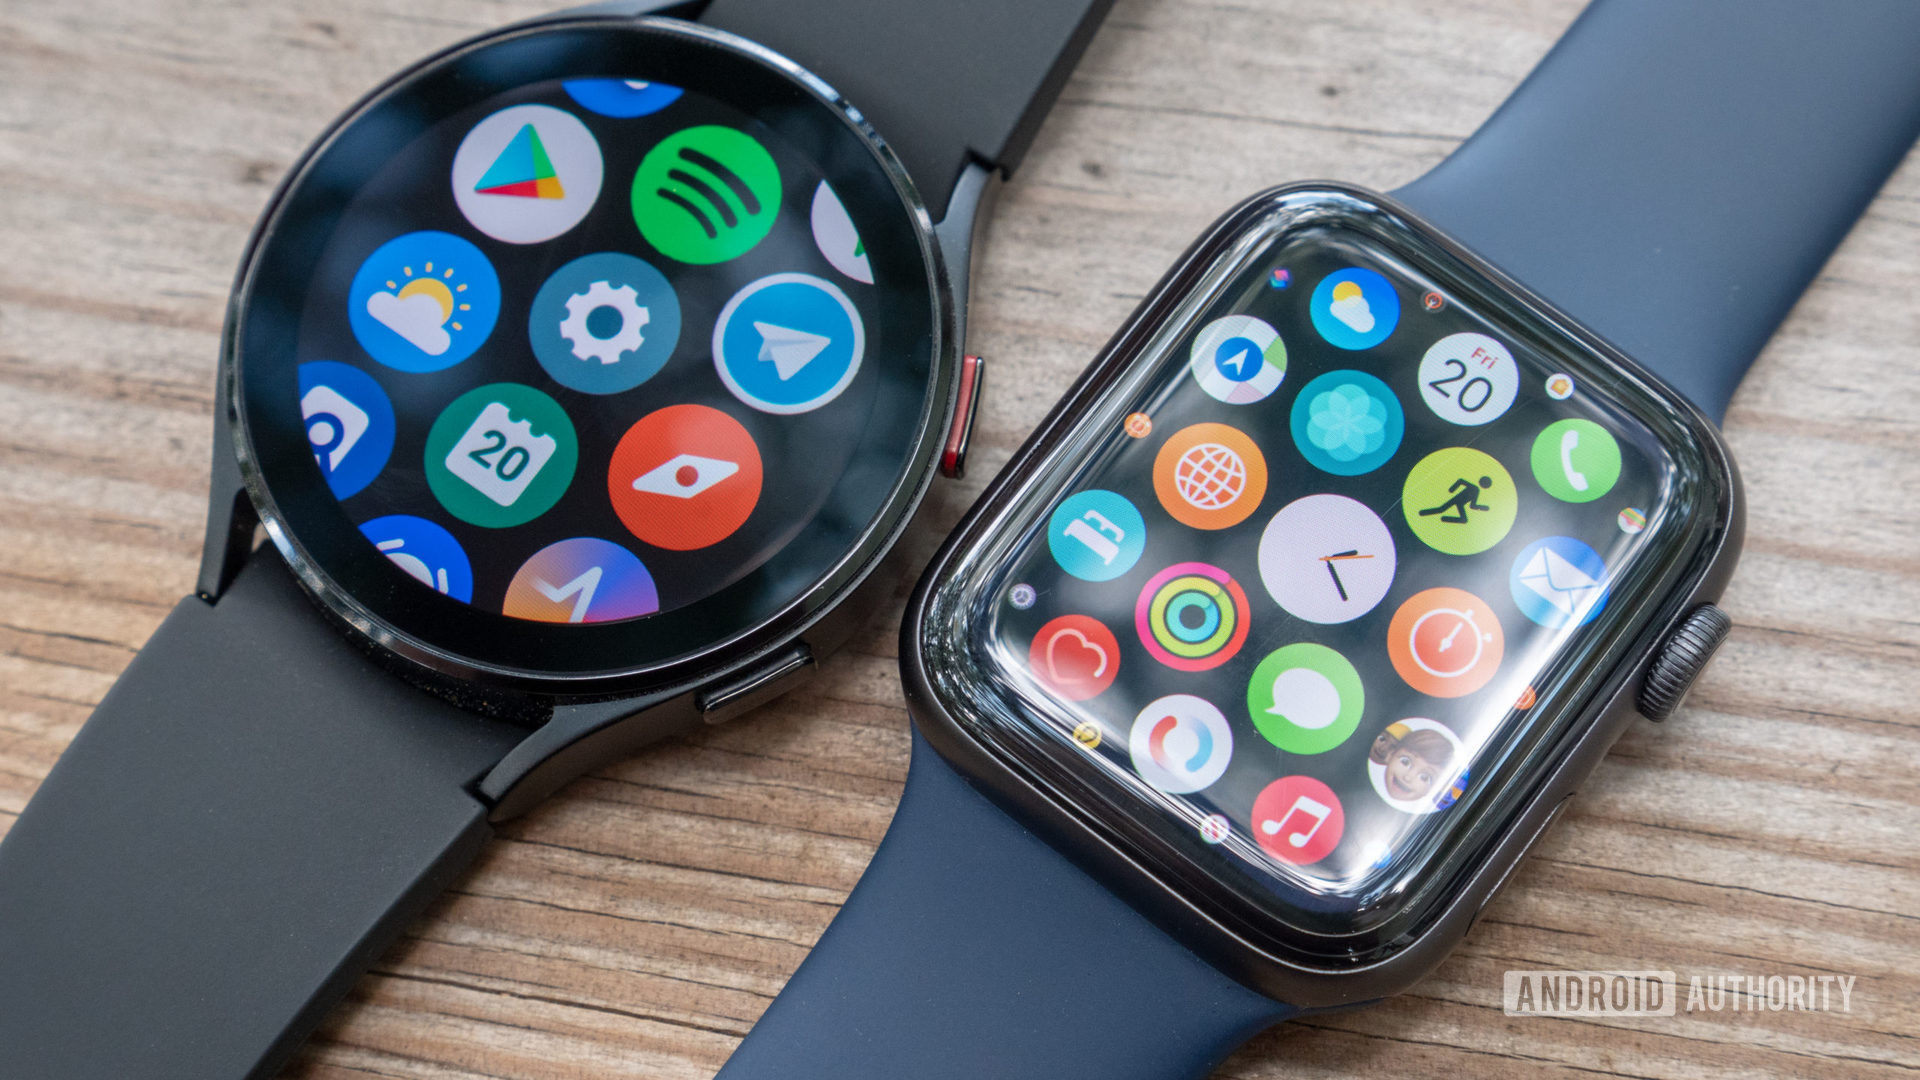 The Samsung Galaxy Watch 4 and Apple Watch Series 6 lying on a table showing the all-apps page.